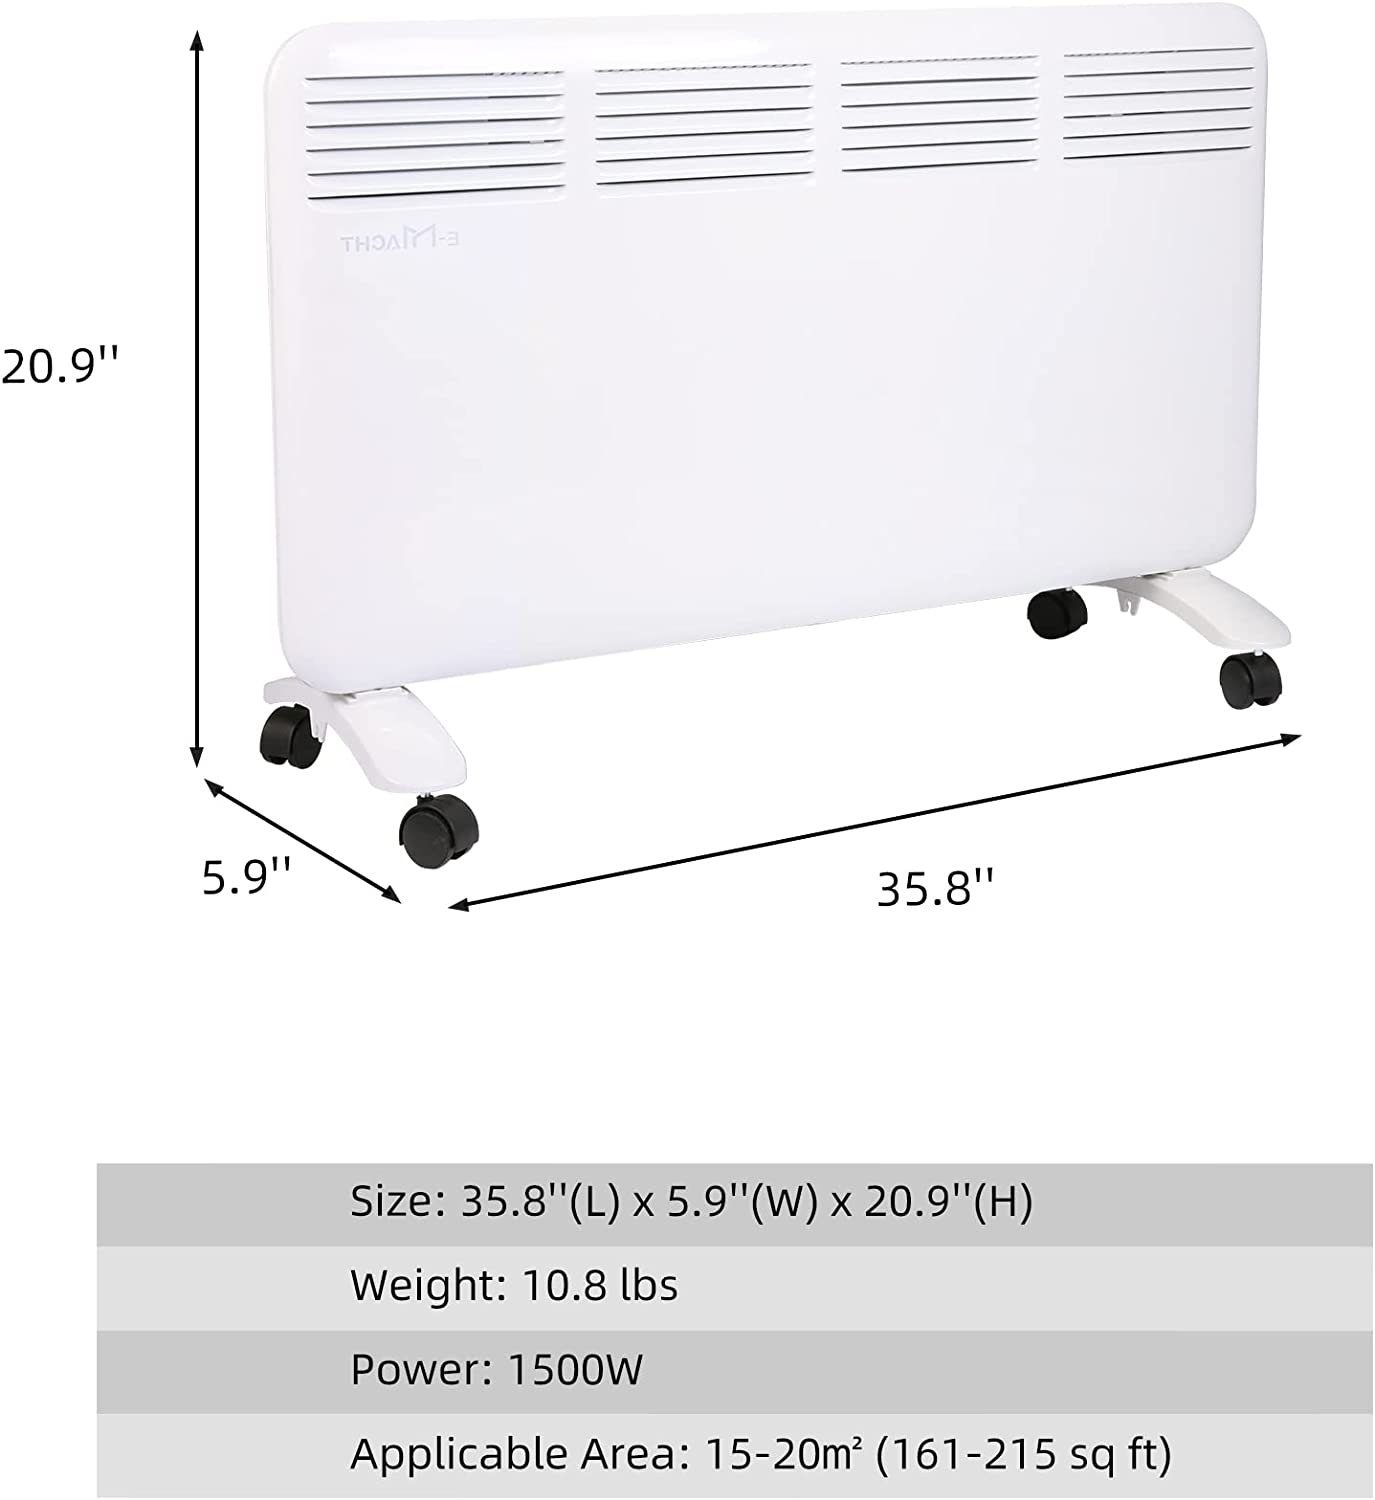 1500W Convection Panel Space Electric Heater Indoor with Adjustable Thermostat LED Digital Display